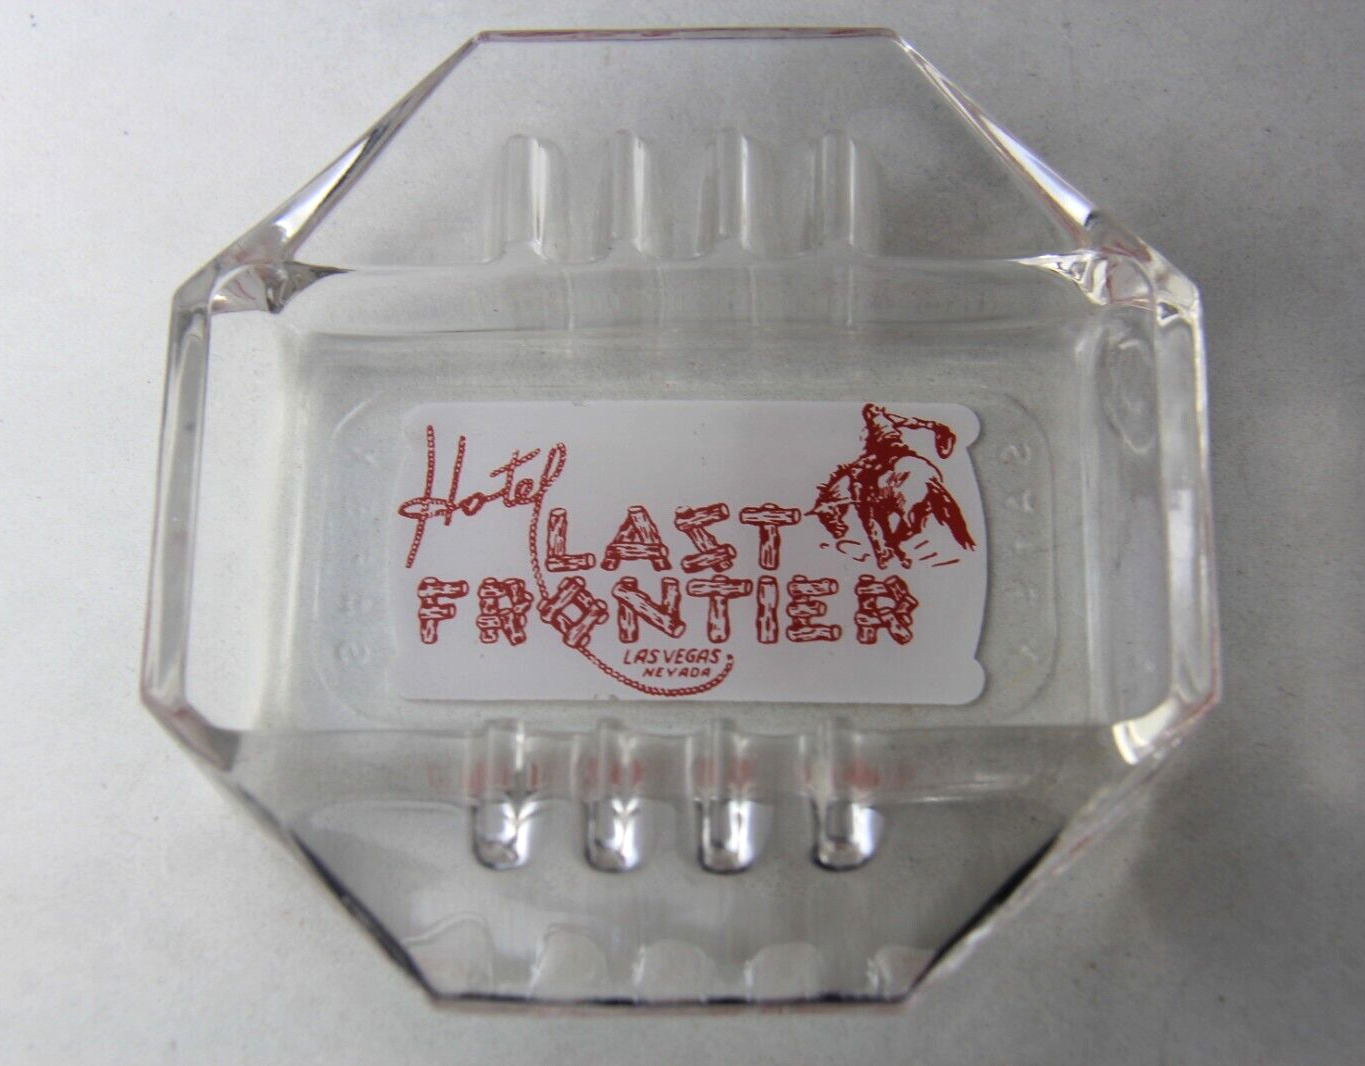 VINTAGE 1950'S HOTEL LAST FRONTIER GLASS ASHTRAY LAS VEGAS NV CASINO BY SAFEX